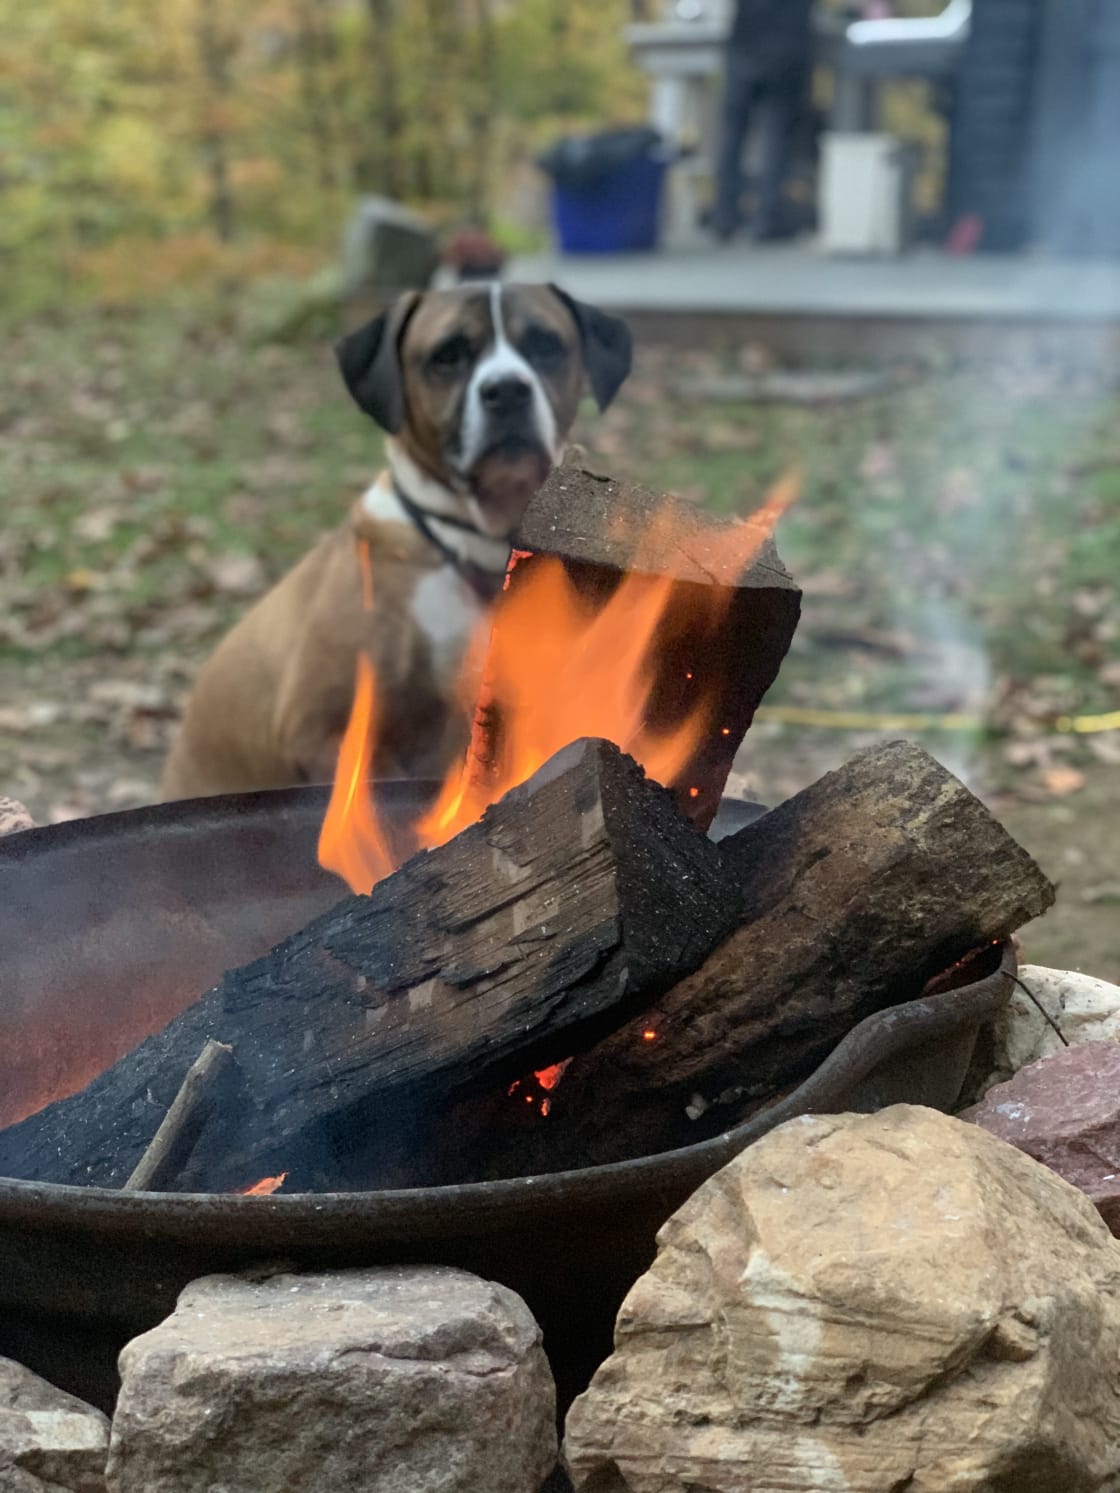 Pup pup enjoying the fire. Firewood provided!